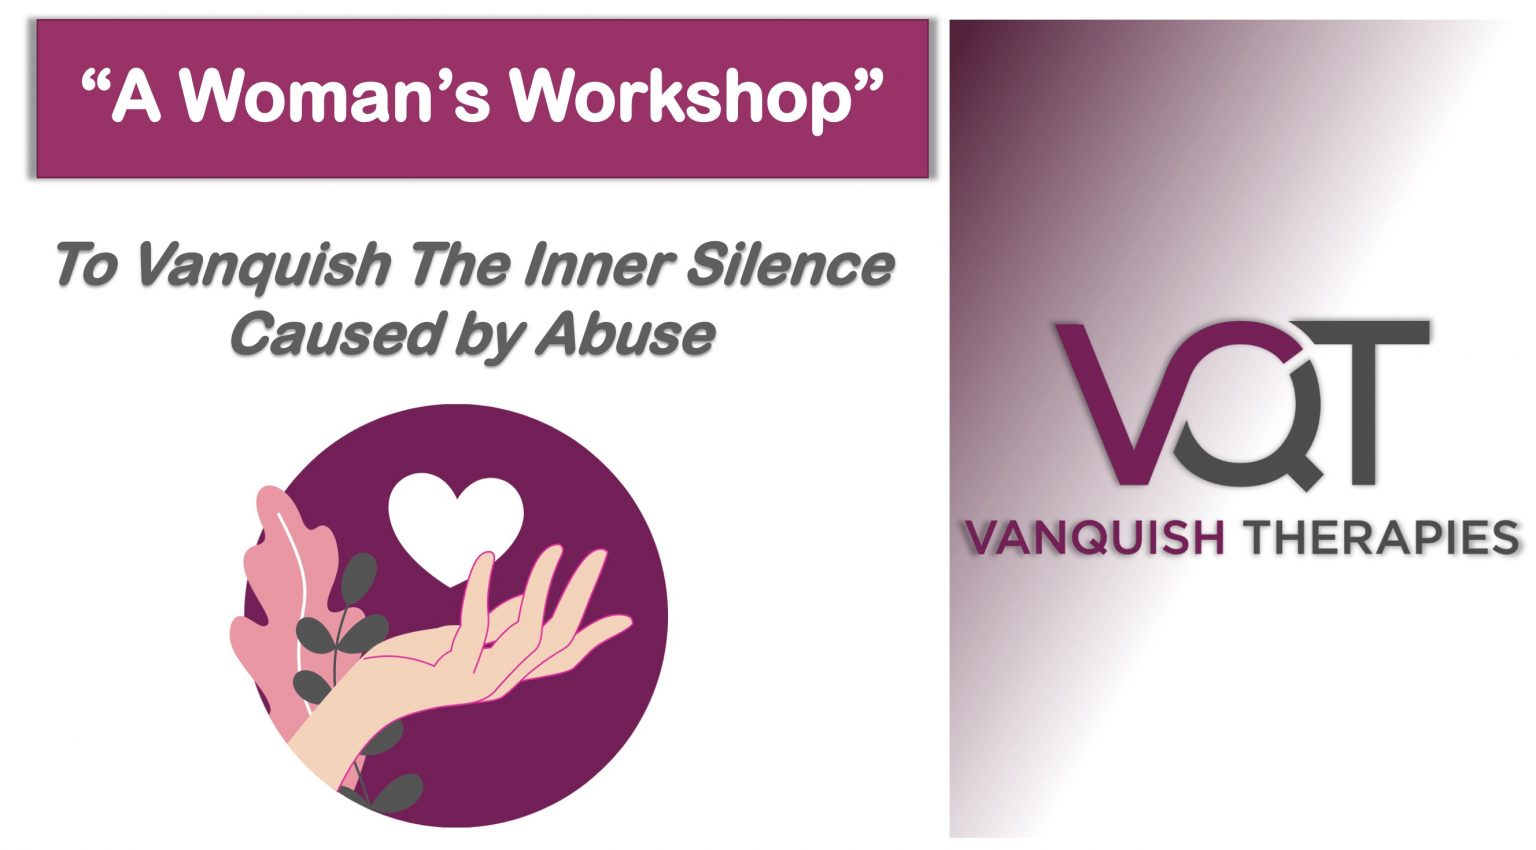 To Vanquish The Inner Silence Caused By Abuse - A Rising Concern – Violence Against Women And Girls